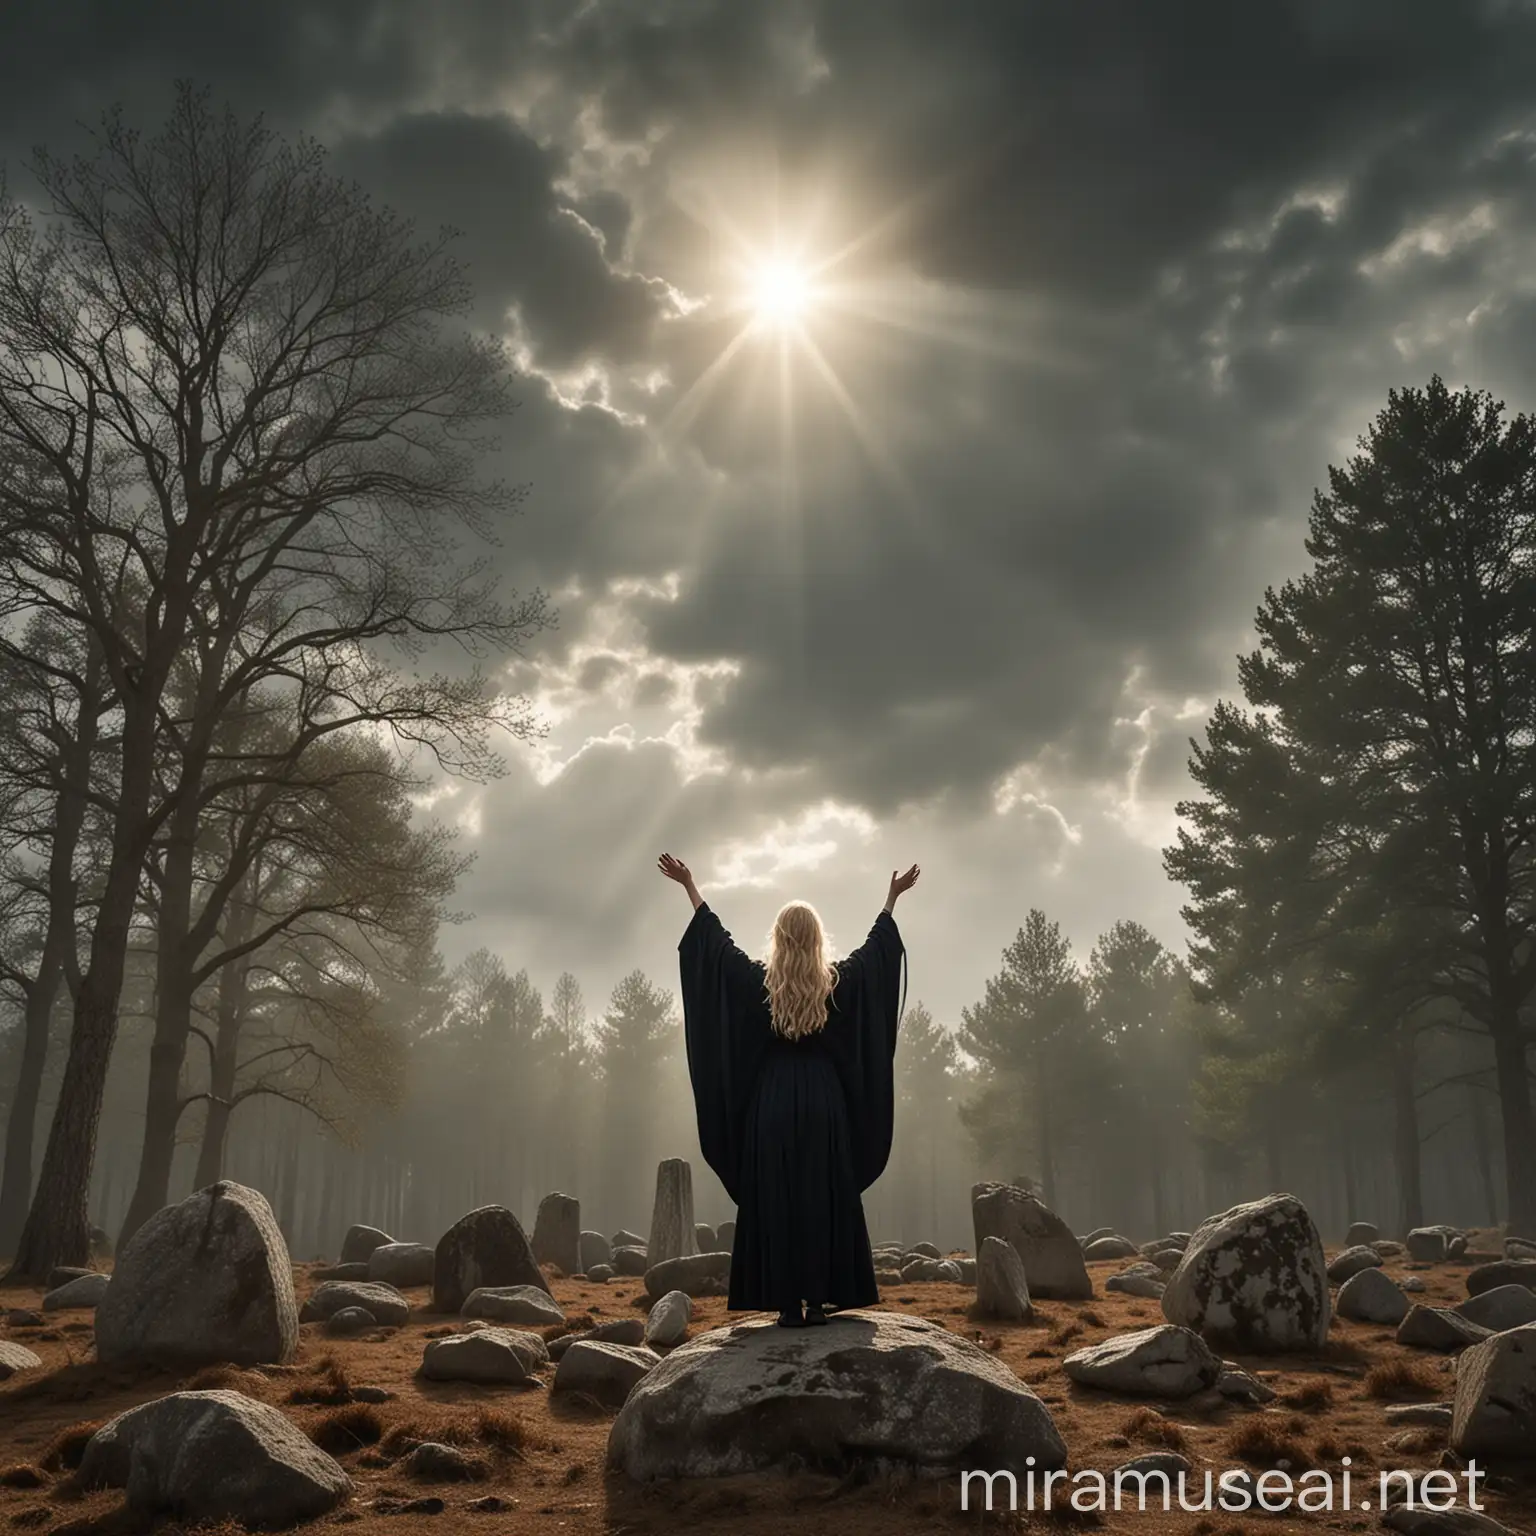 A blond woman, wearing a dark ritual robe, standing on top of a 2 meters high dolmen, in the middle of a clearing, in a flat oak forest area. She's raising her arms towards a bright sun. The sky is slowly darkening with storm clouds all around the scene. The image should be high resolution.